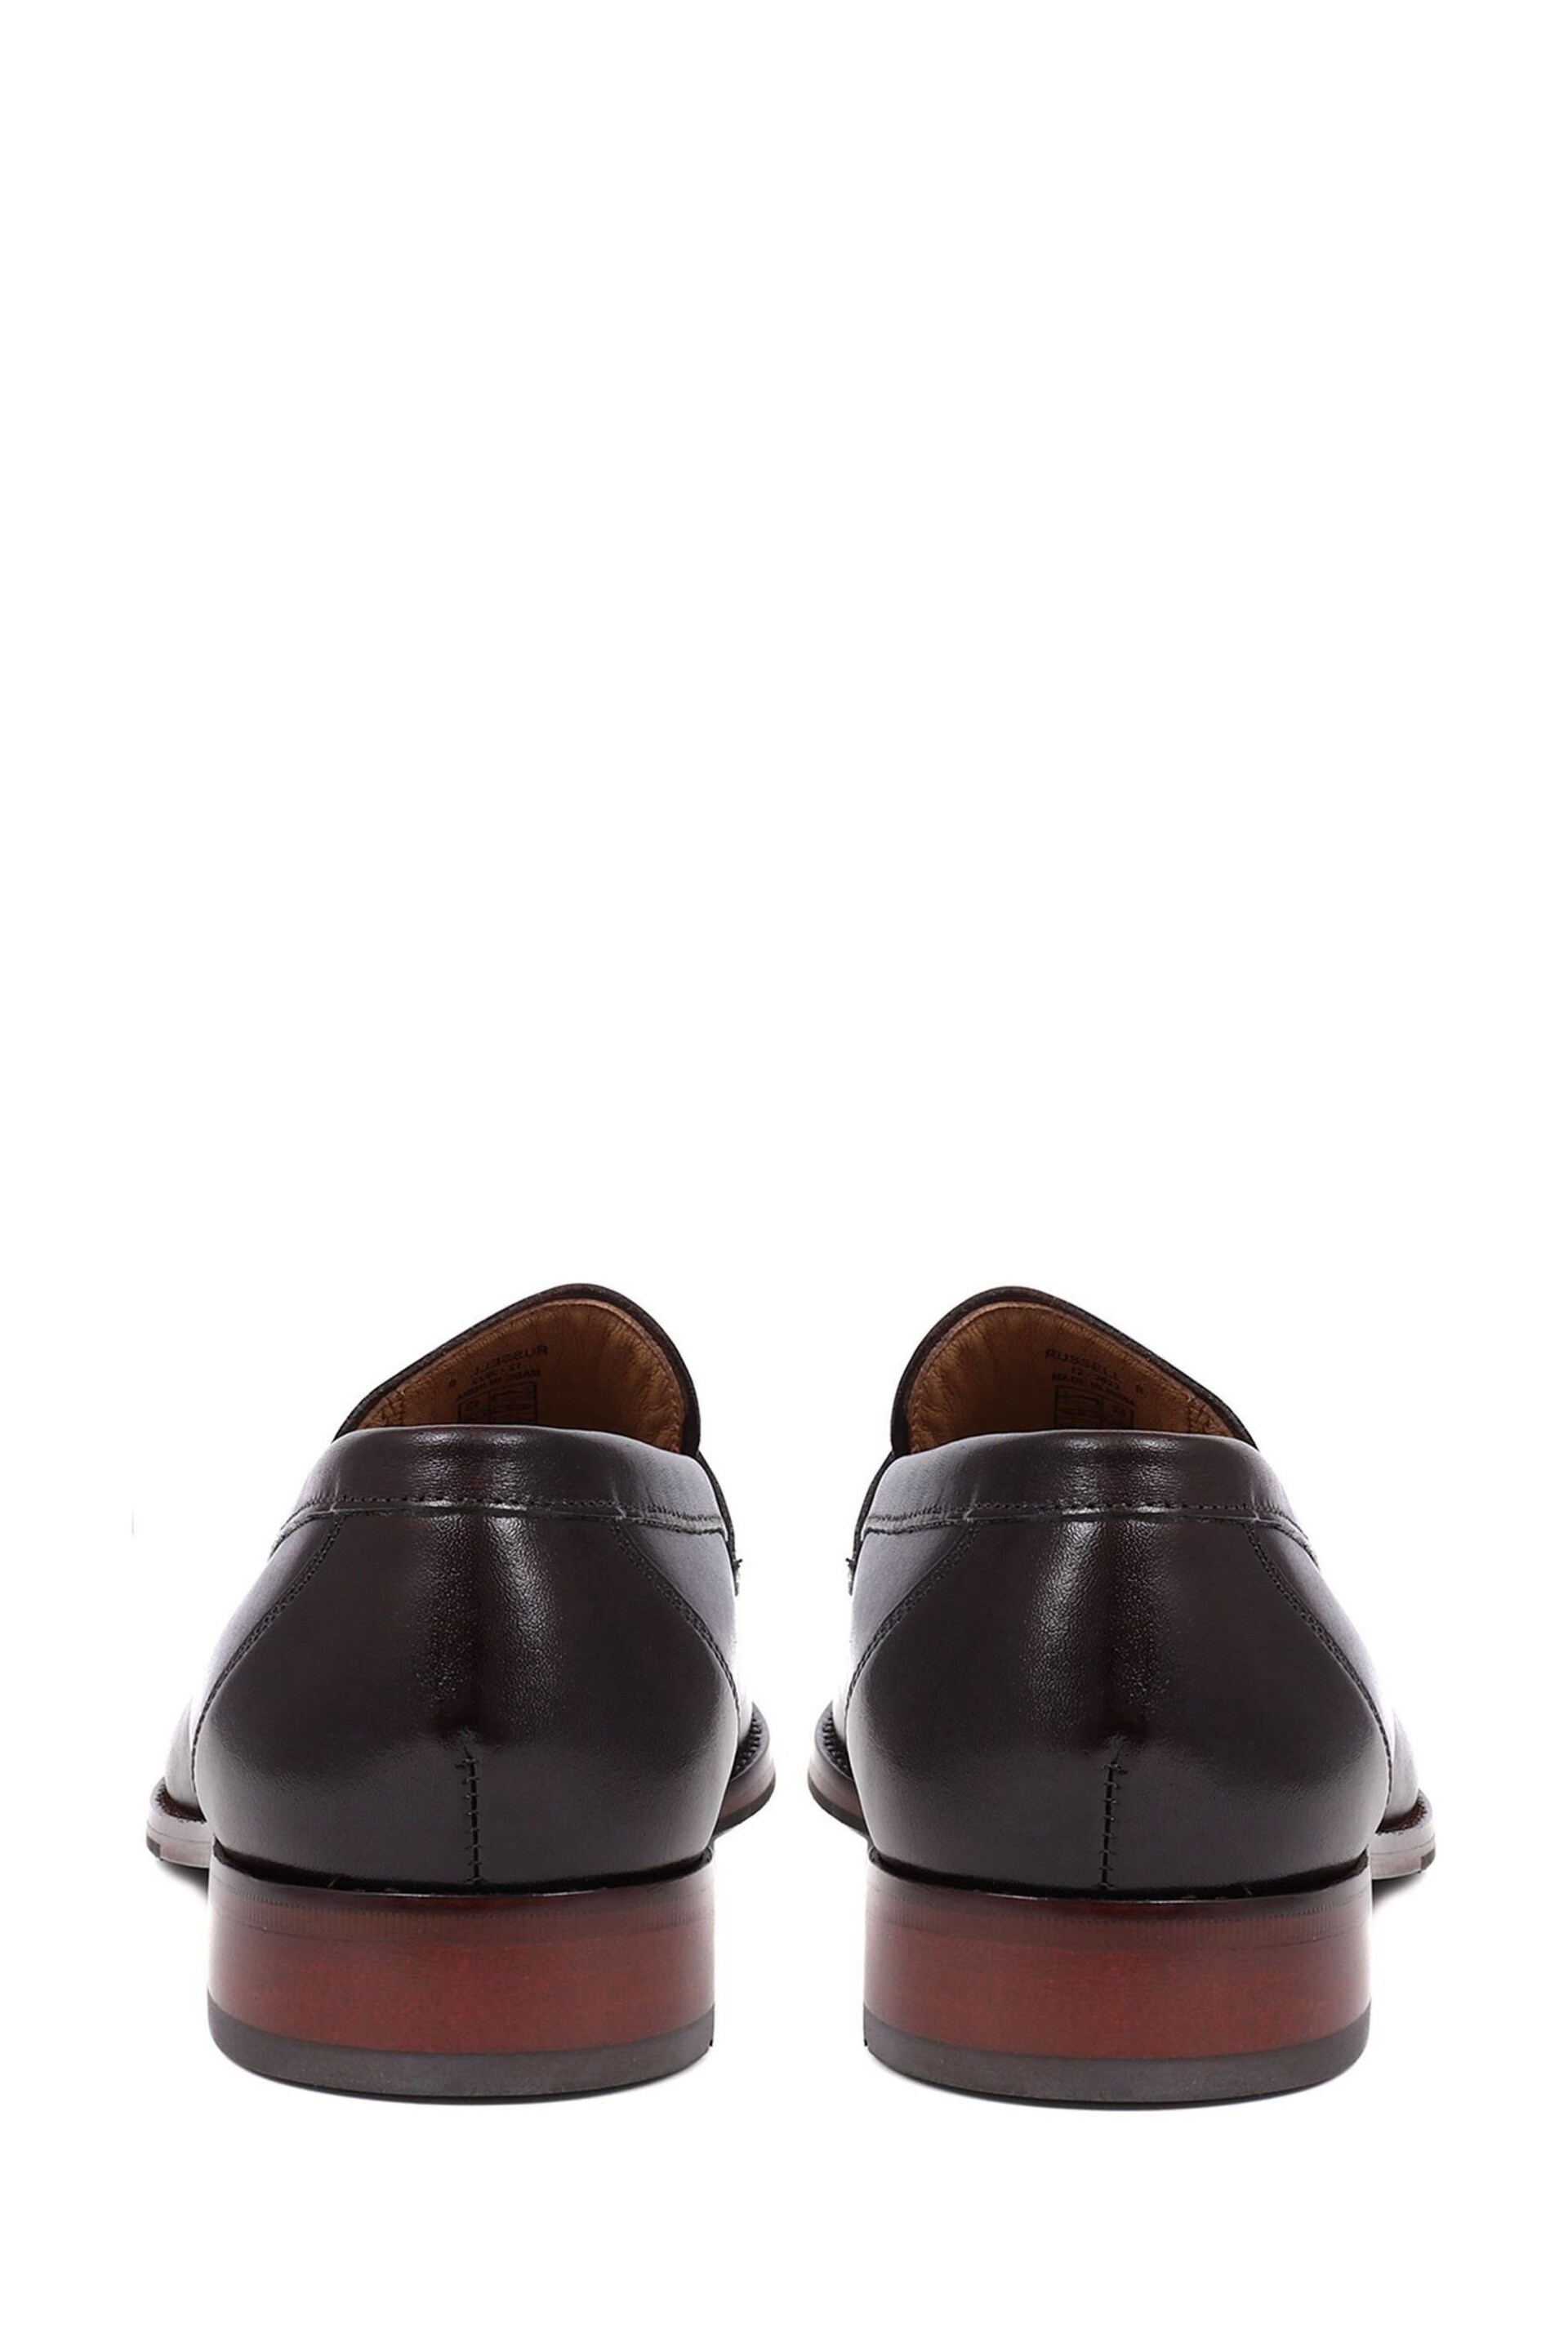 Jones Bootmaker Leather Penny Loafers - Image 4 of 6